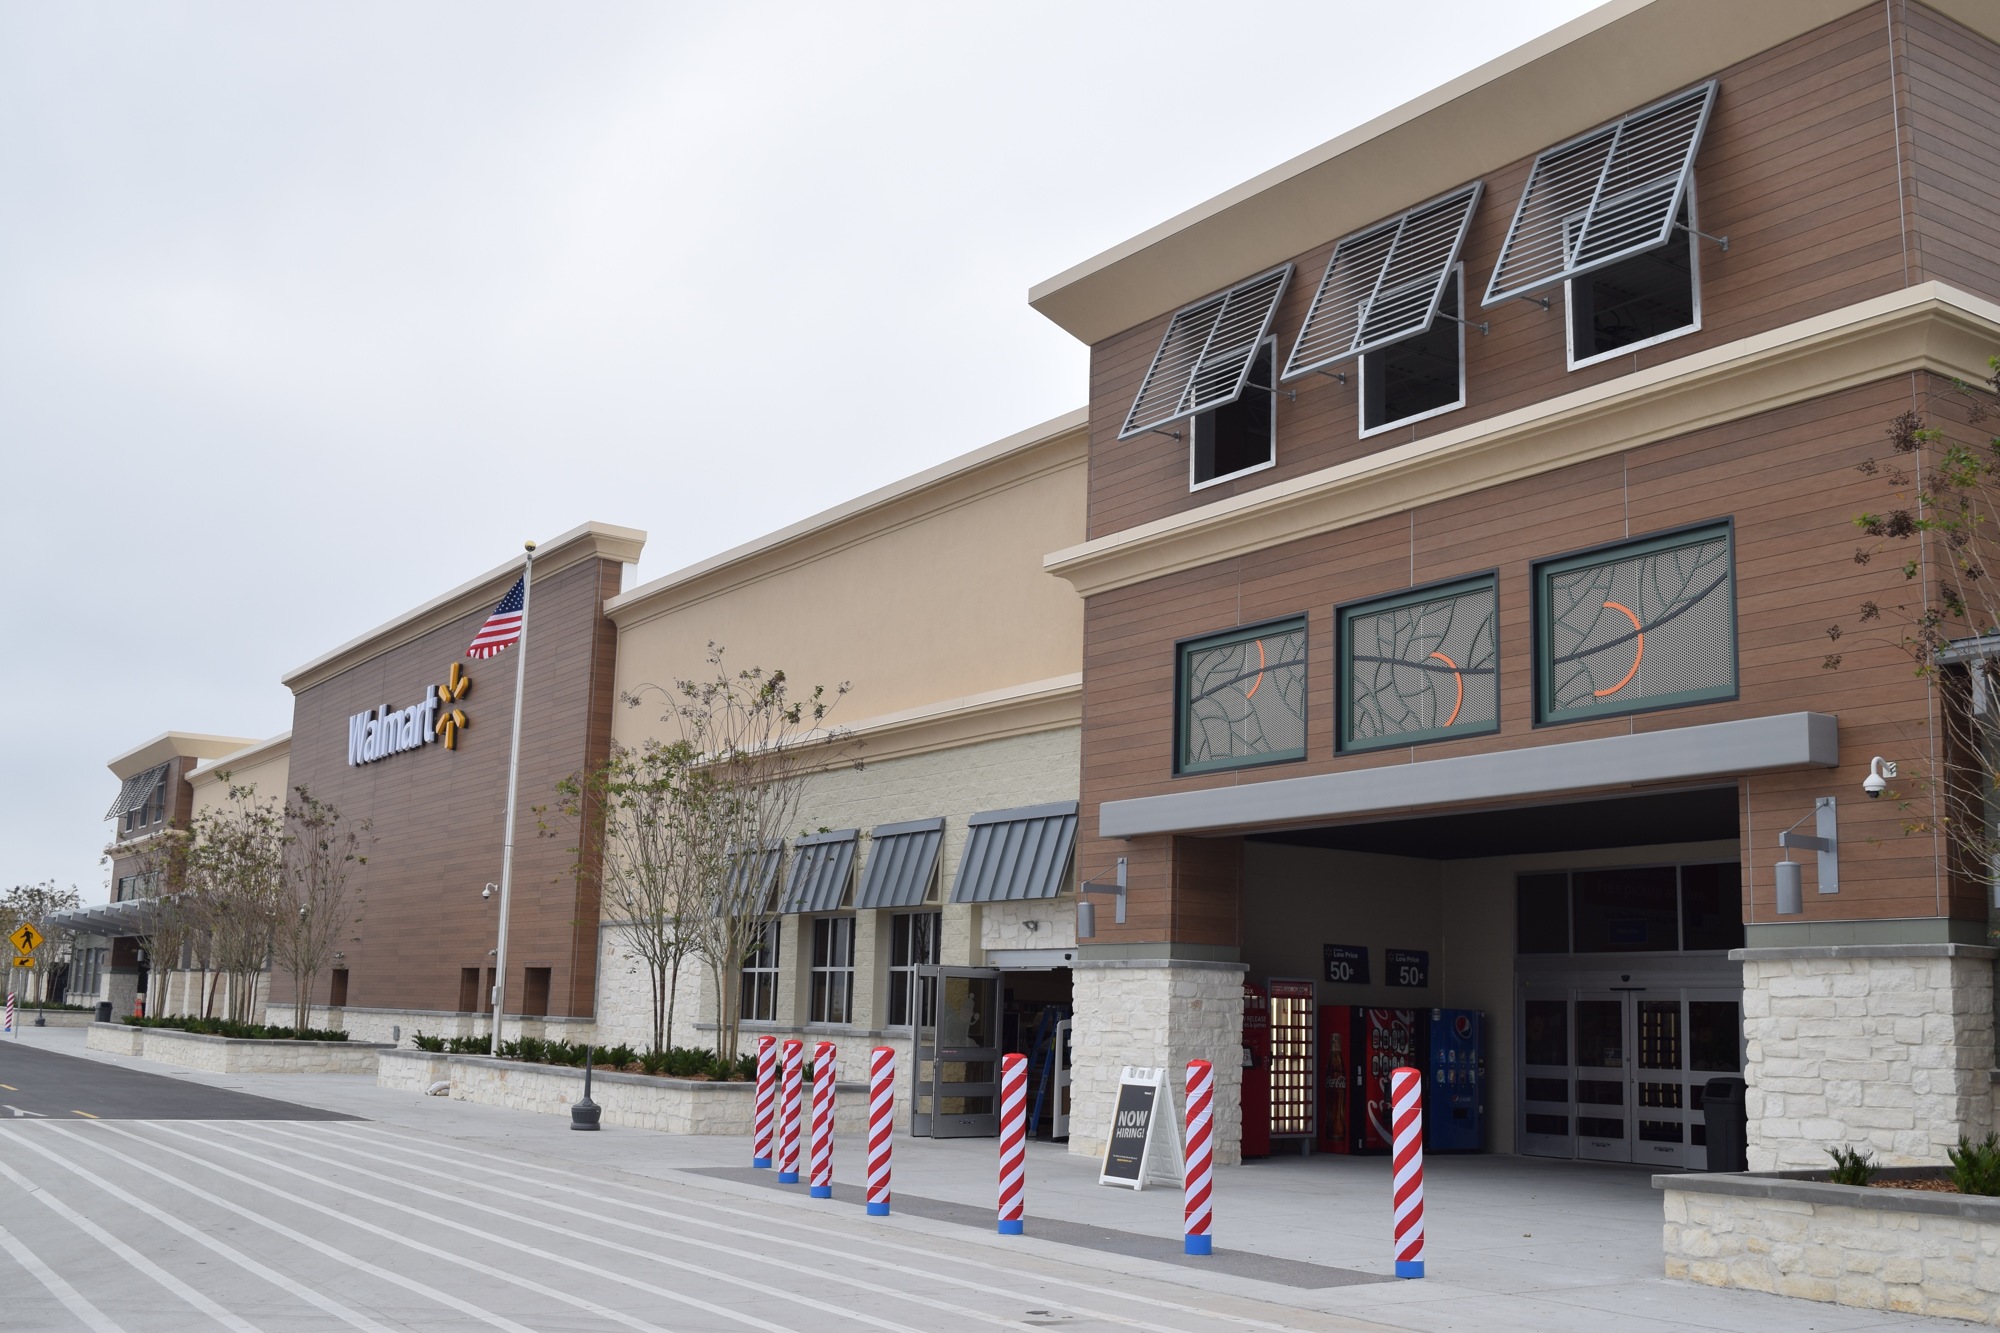 The new Walmart Supercenter will cater to Hamlin and Independence residents.